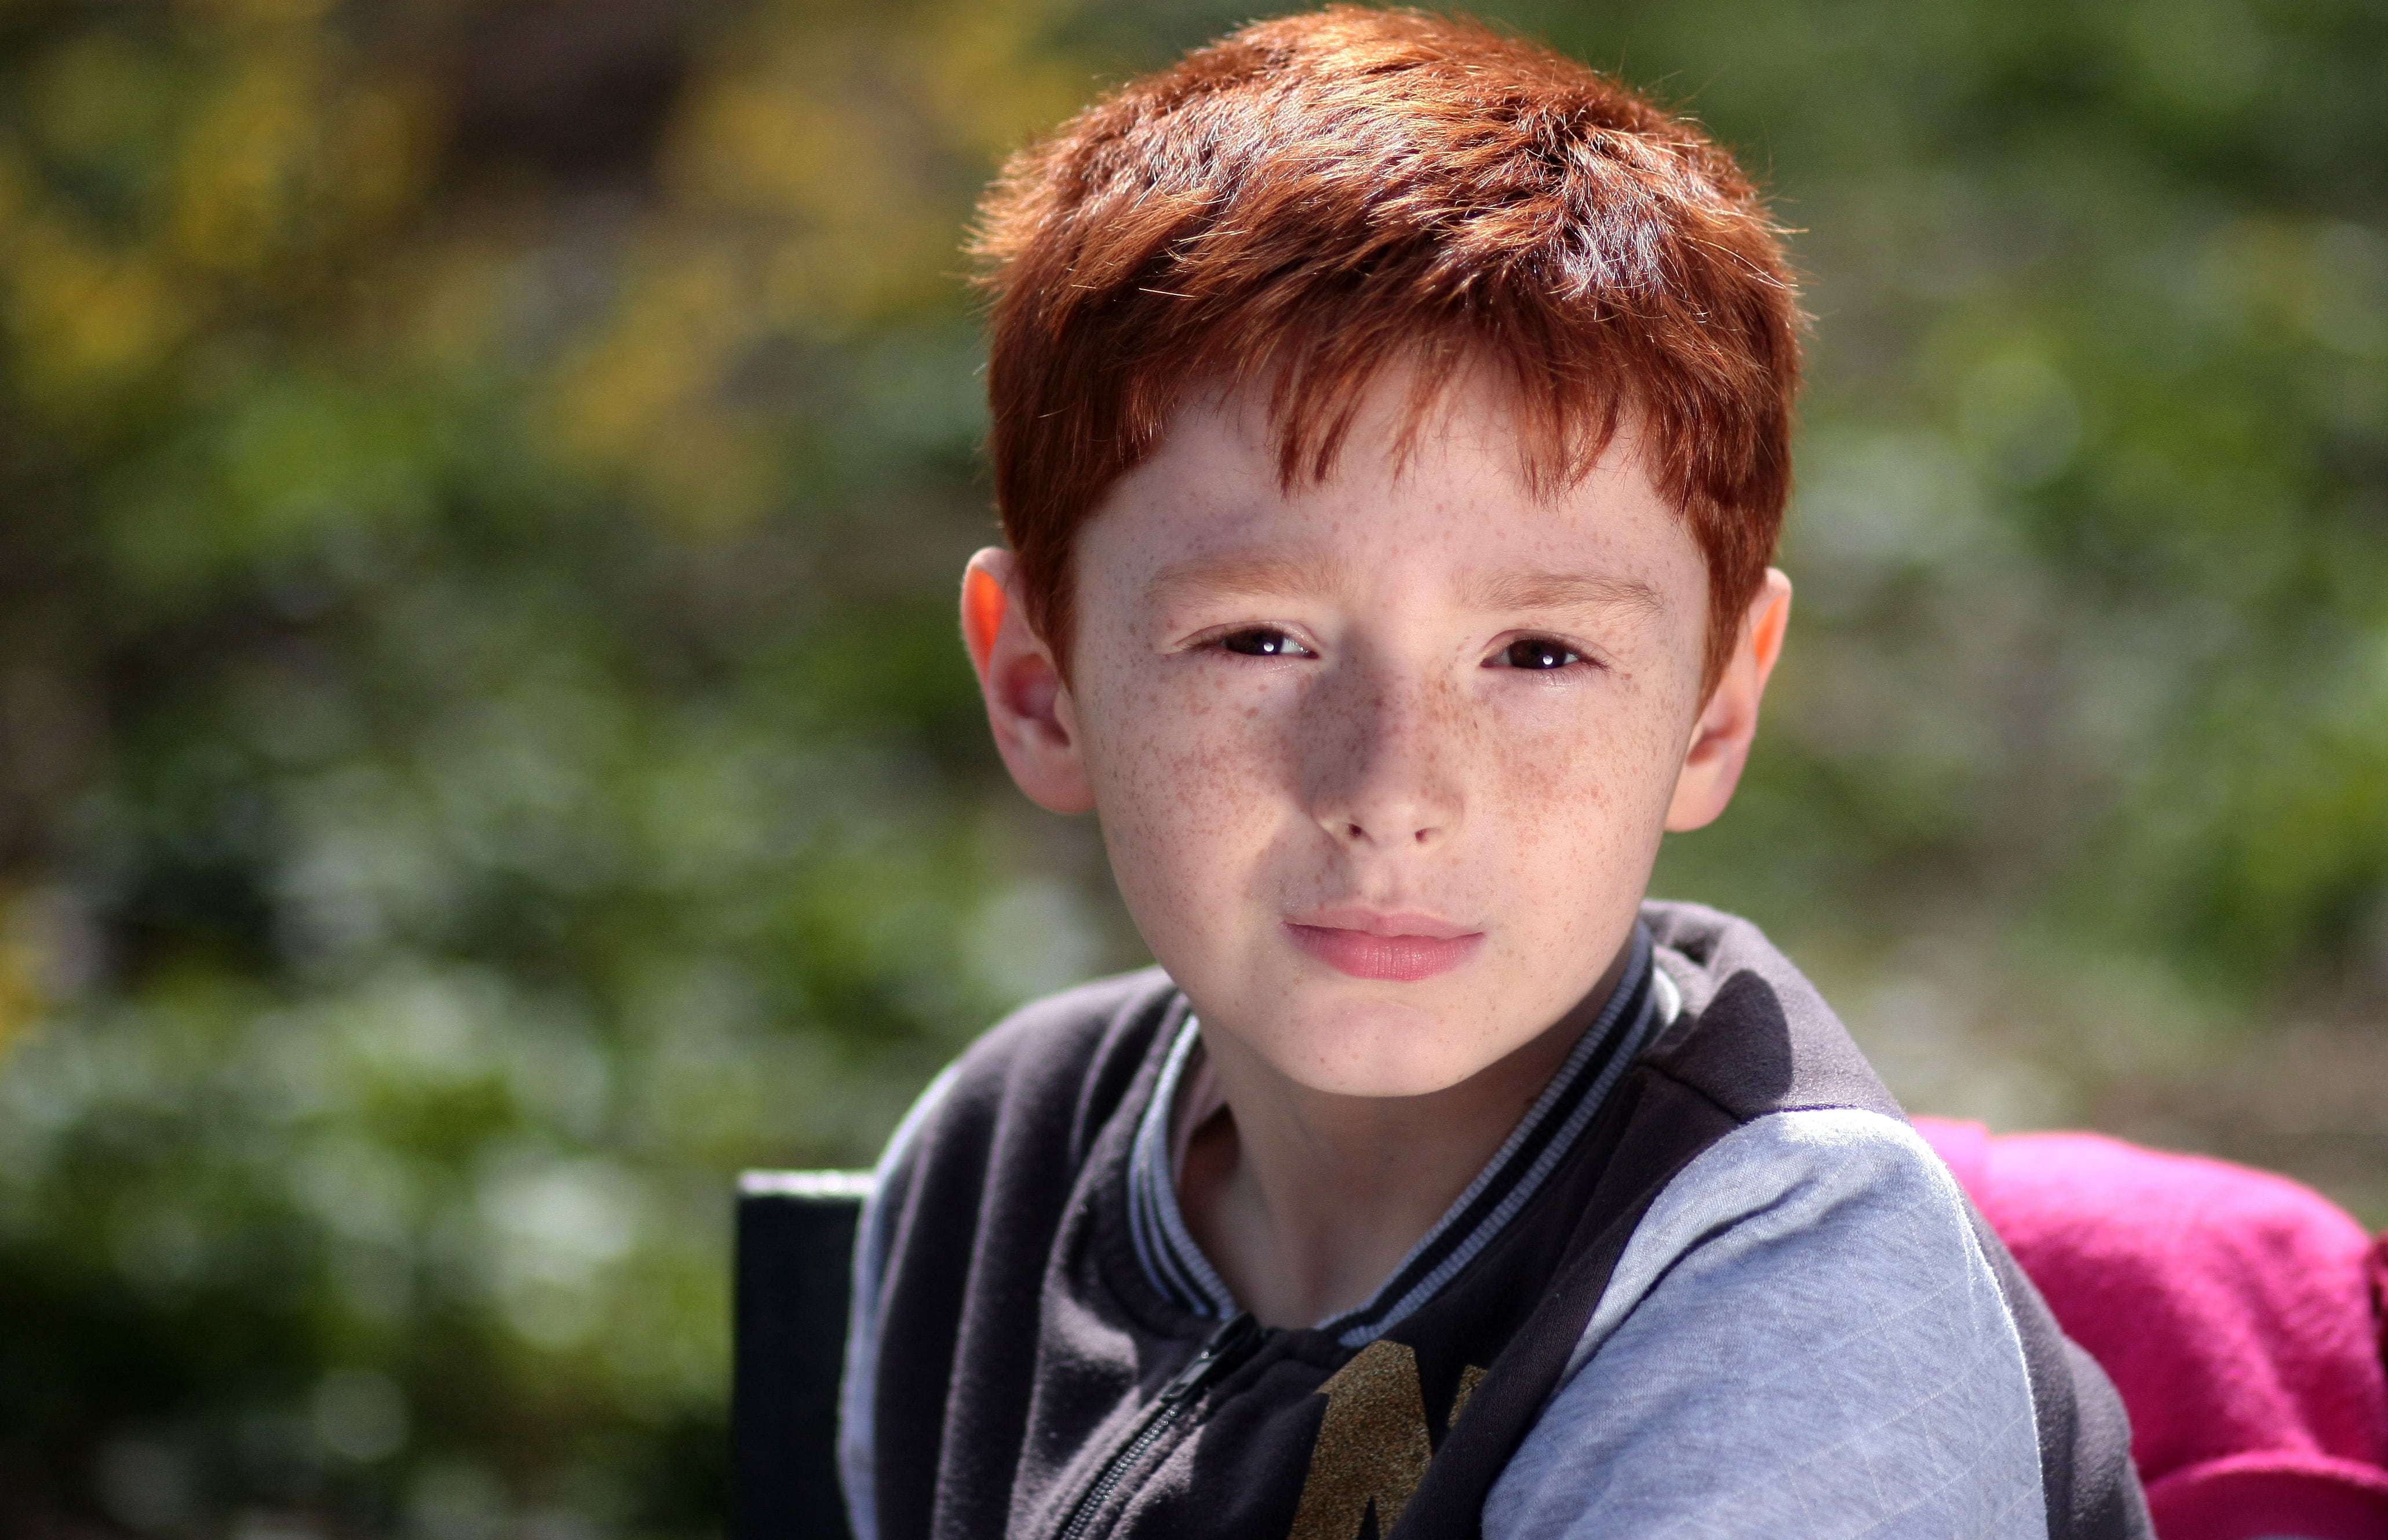 boy wearing gray zip-up jacket, red hair, freckles, portrait